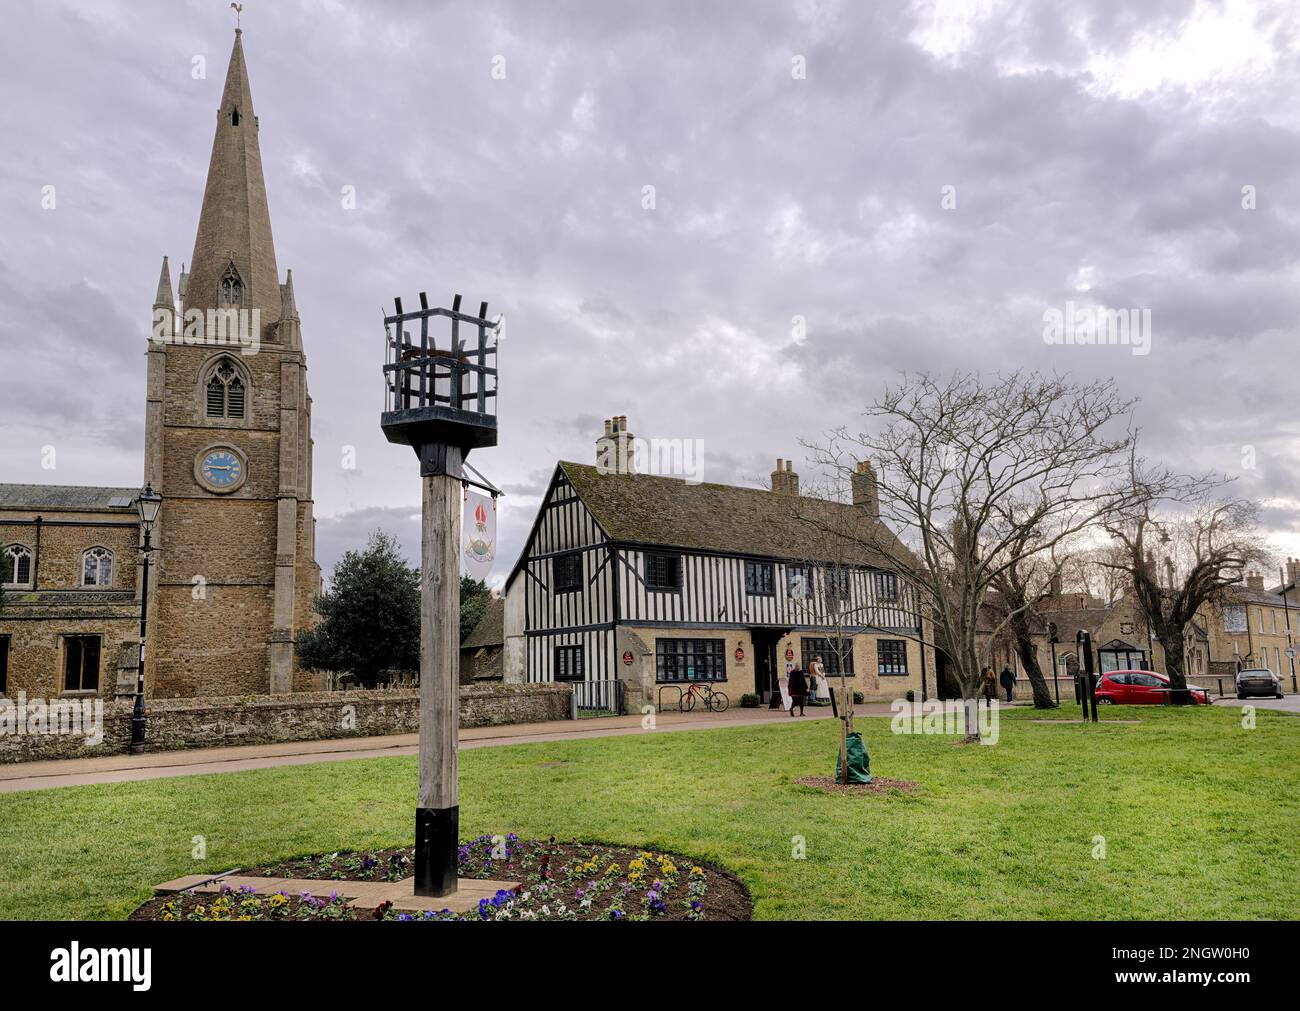 Oliver Cromwell's House in Ely. Stock Photo